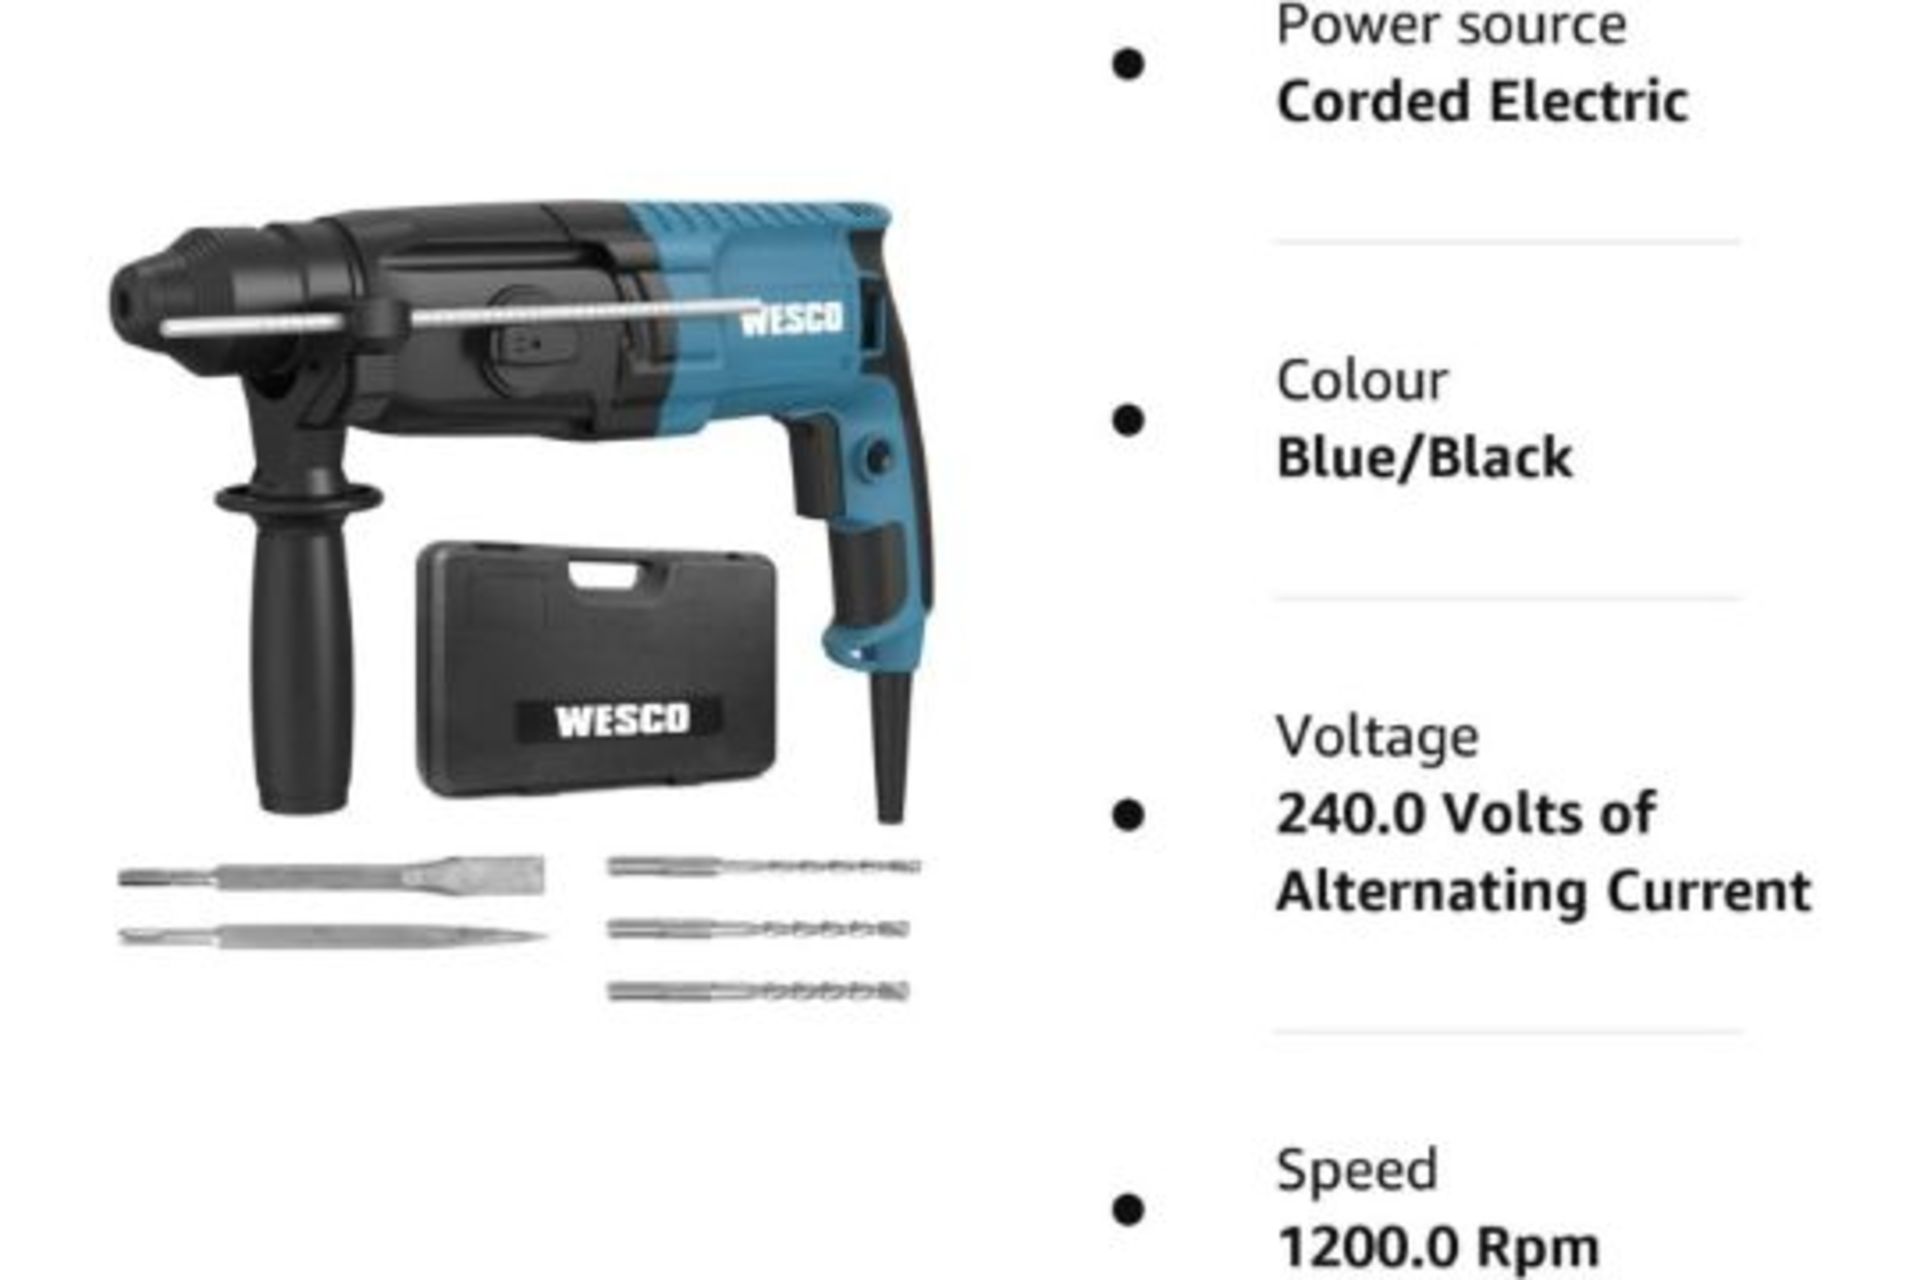 2 x NEW BOXED WESCO 800W SDS Plus Rotary Hammer Drill, 3 Modes in 1, 2.8J Impact Energy, Variable- - Image 3 of 3